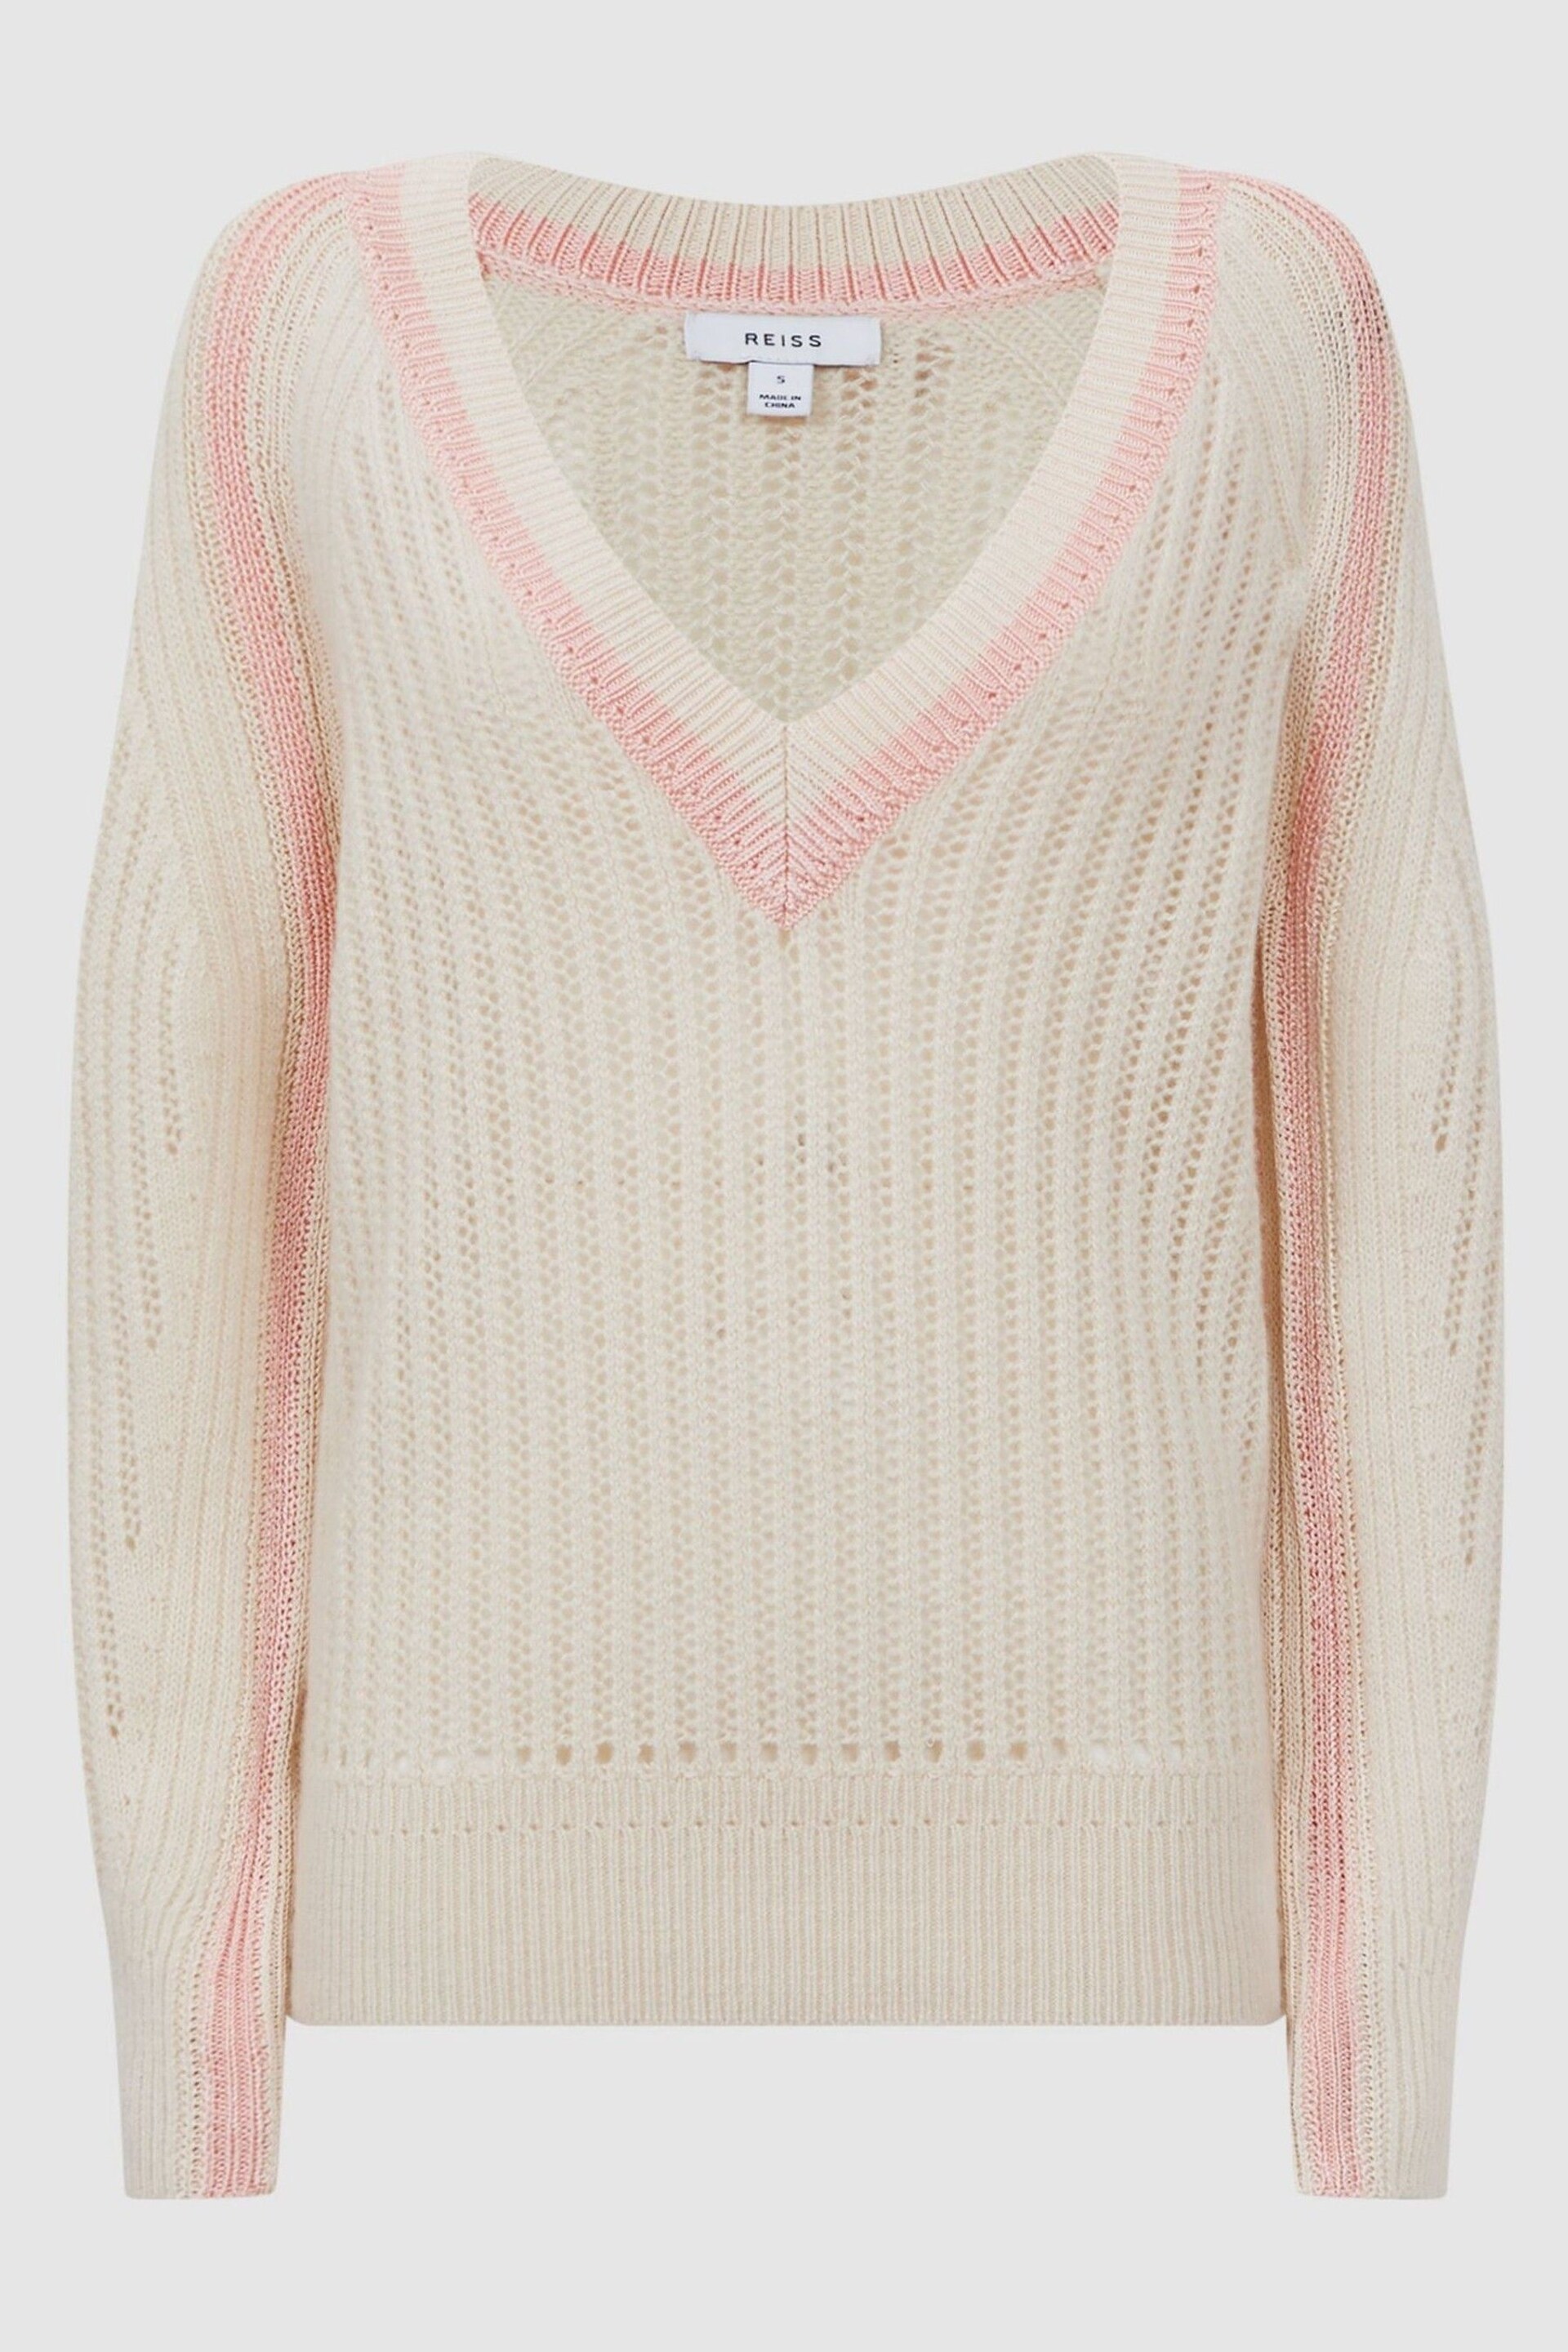 Reiss Cream/Nude Vale Wool Blend Knitted V-Neck Jumper - Image 2 of 5